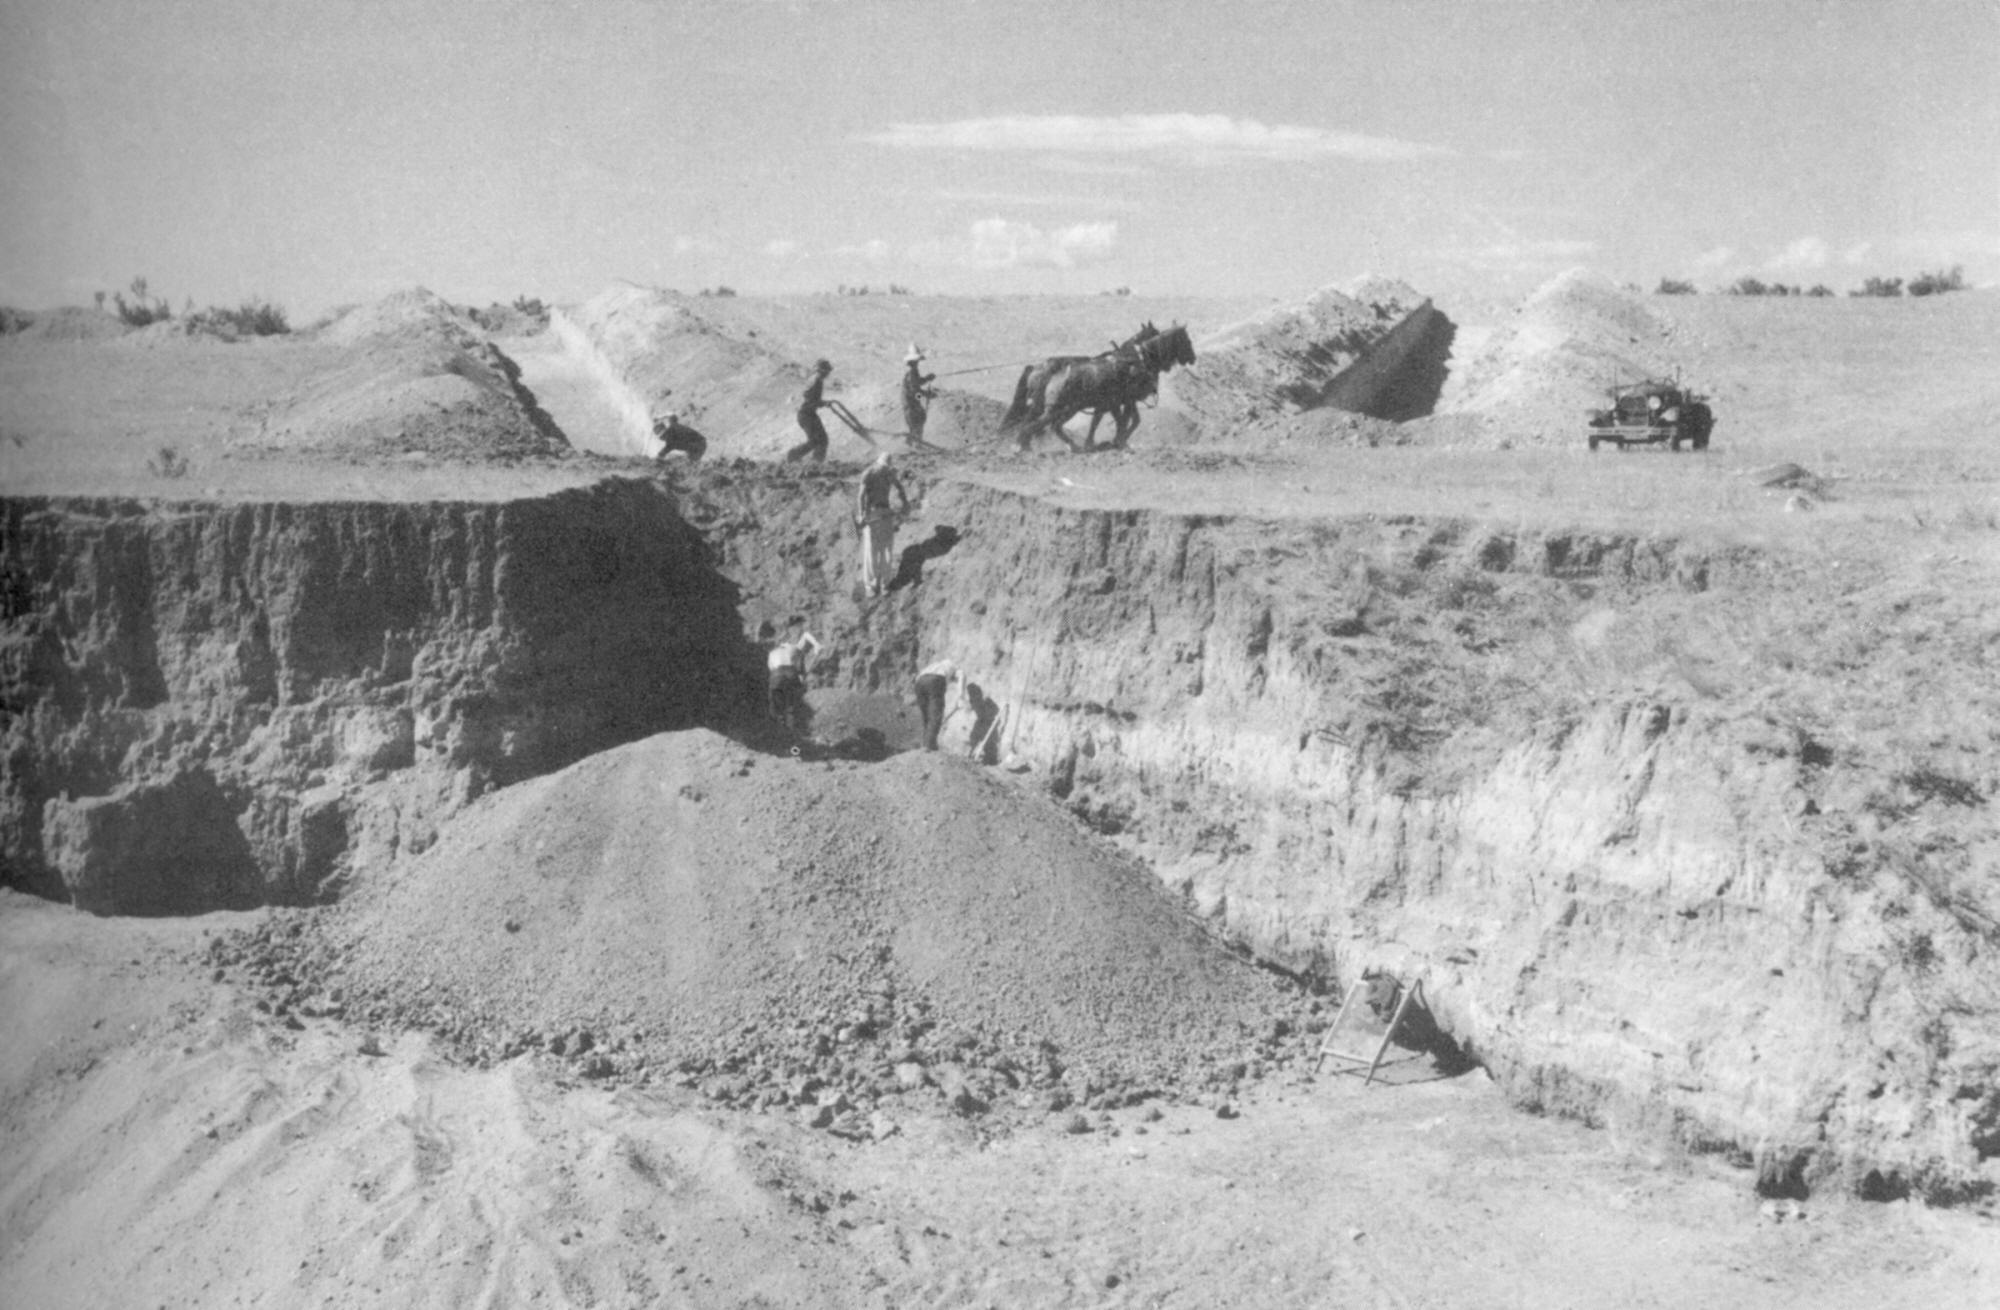 1936 excavation of the Lindenmeier site near the Big Pit.